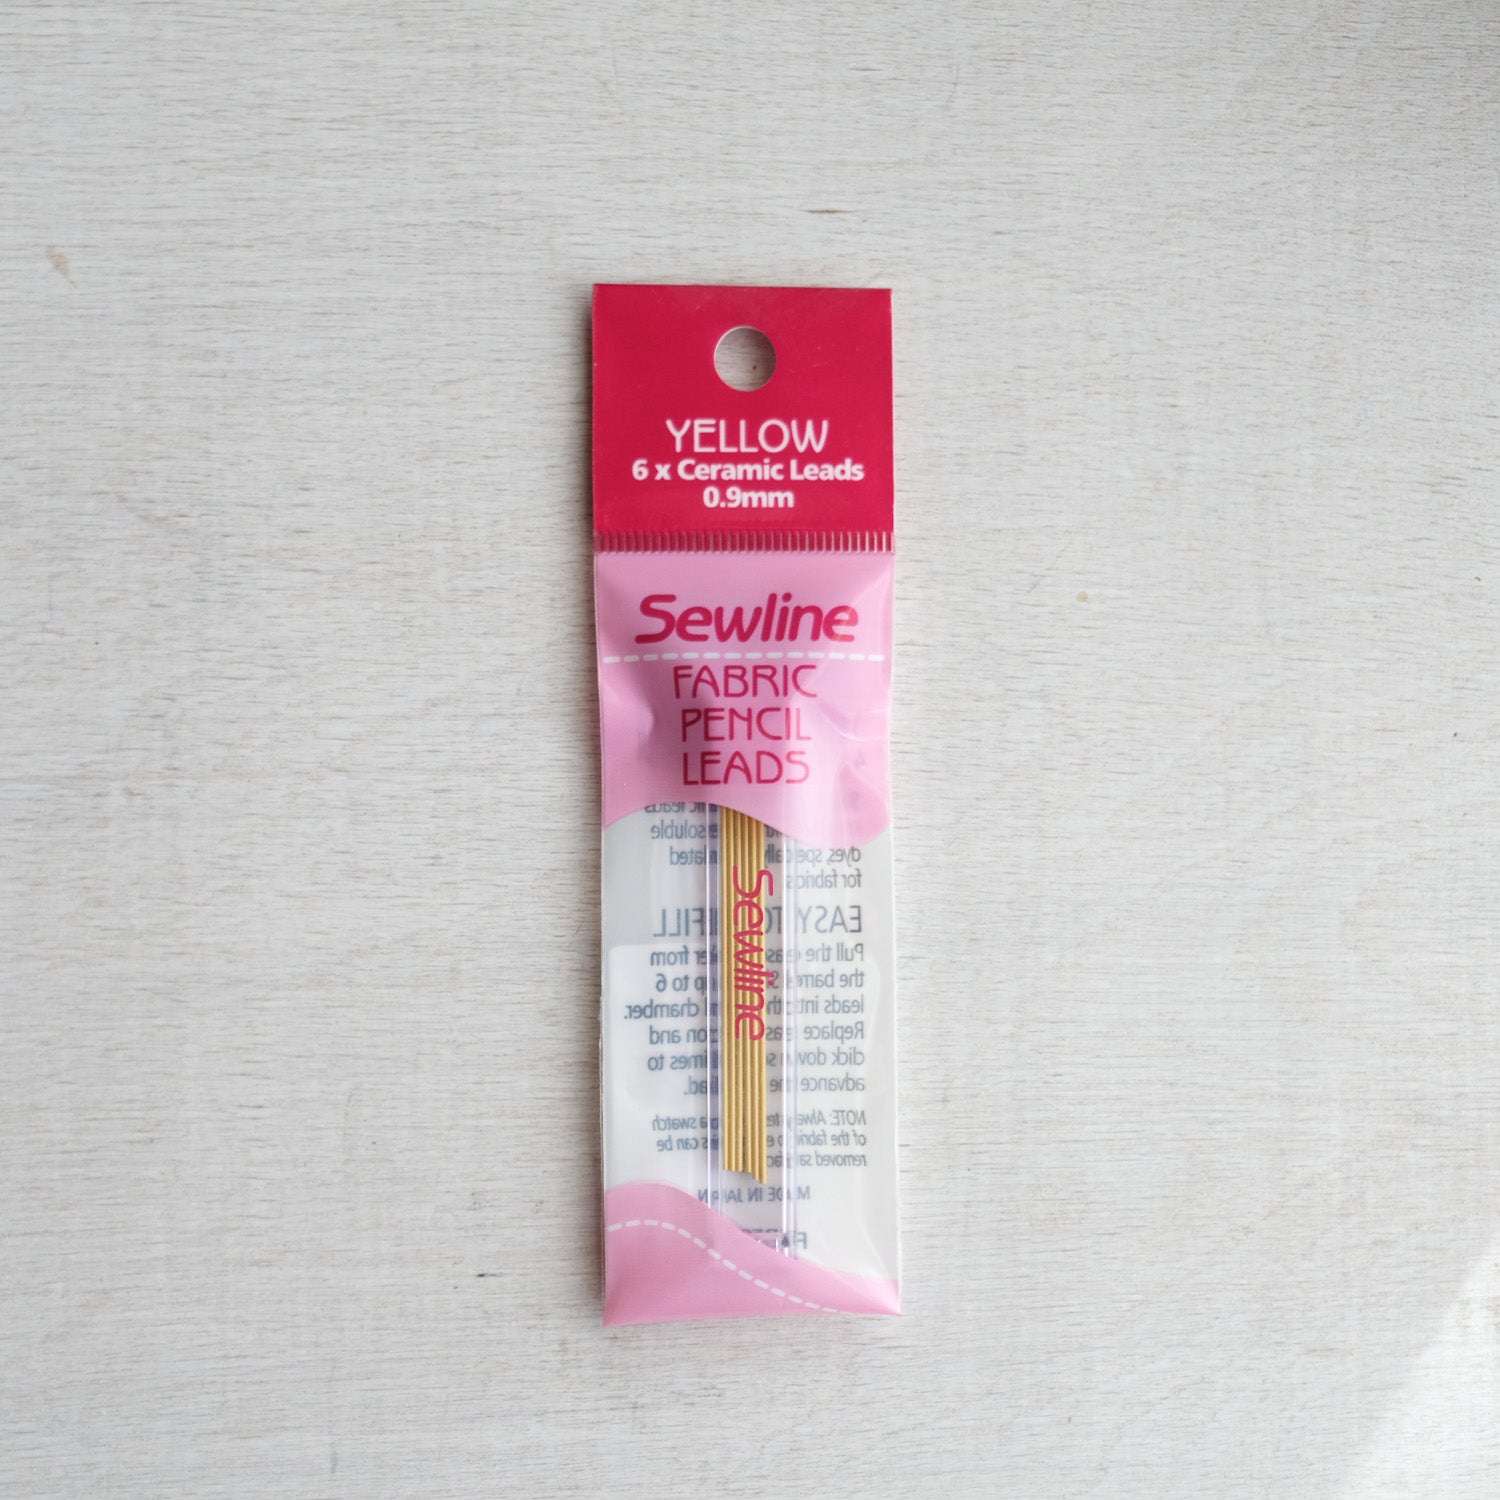 Label: Sewline Fabric Pencil Leads - Yellow